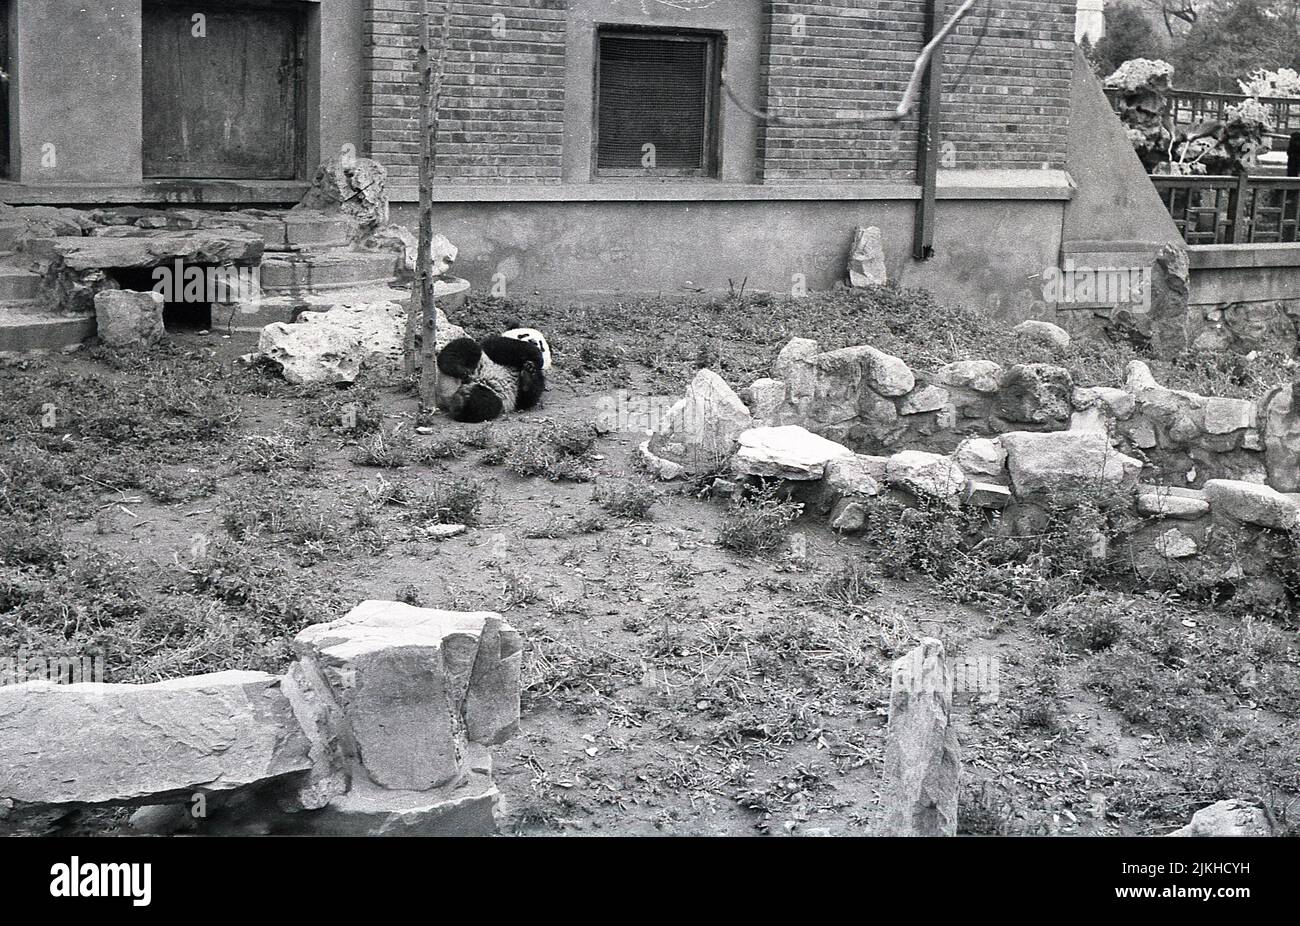 1963, historical, London Zoo, panda in enclosure. Chi Chi, a giant female panda from Sichuan, China came to the Zoo in 1958 and became one of the Zoo's main attractions. Stock Photo